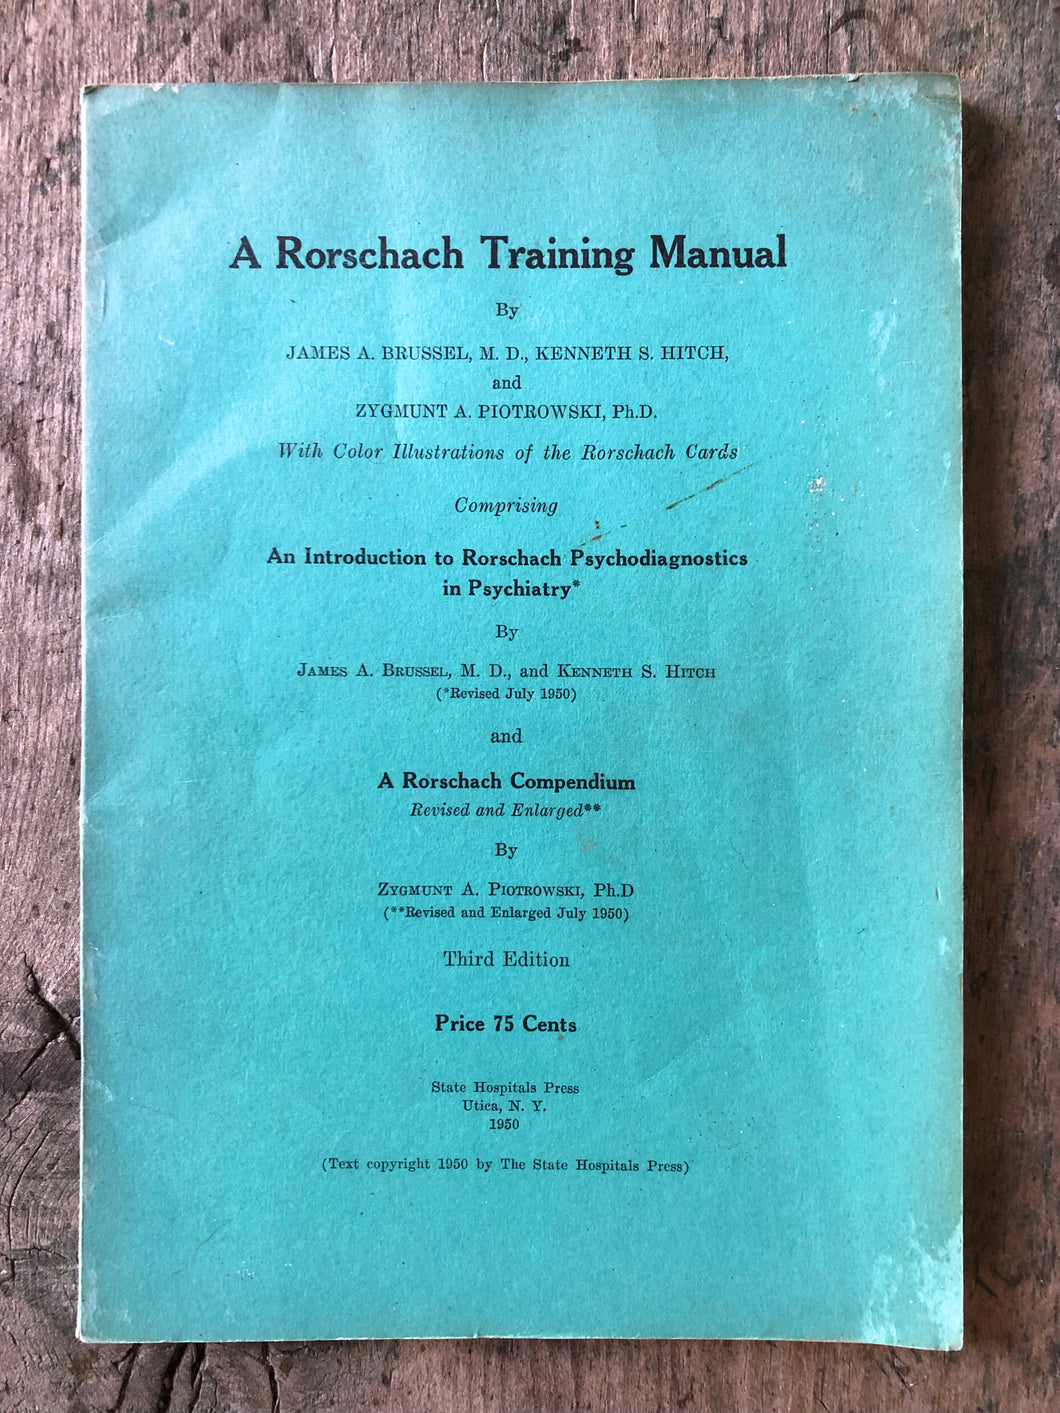 The Rorschach Training Manual. by James A. Brussels, Kenneth S. Hitch, and Zygmunt A. Piotrowski